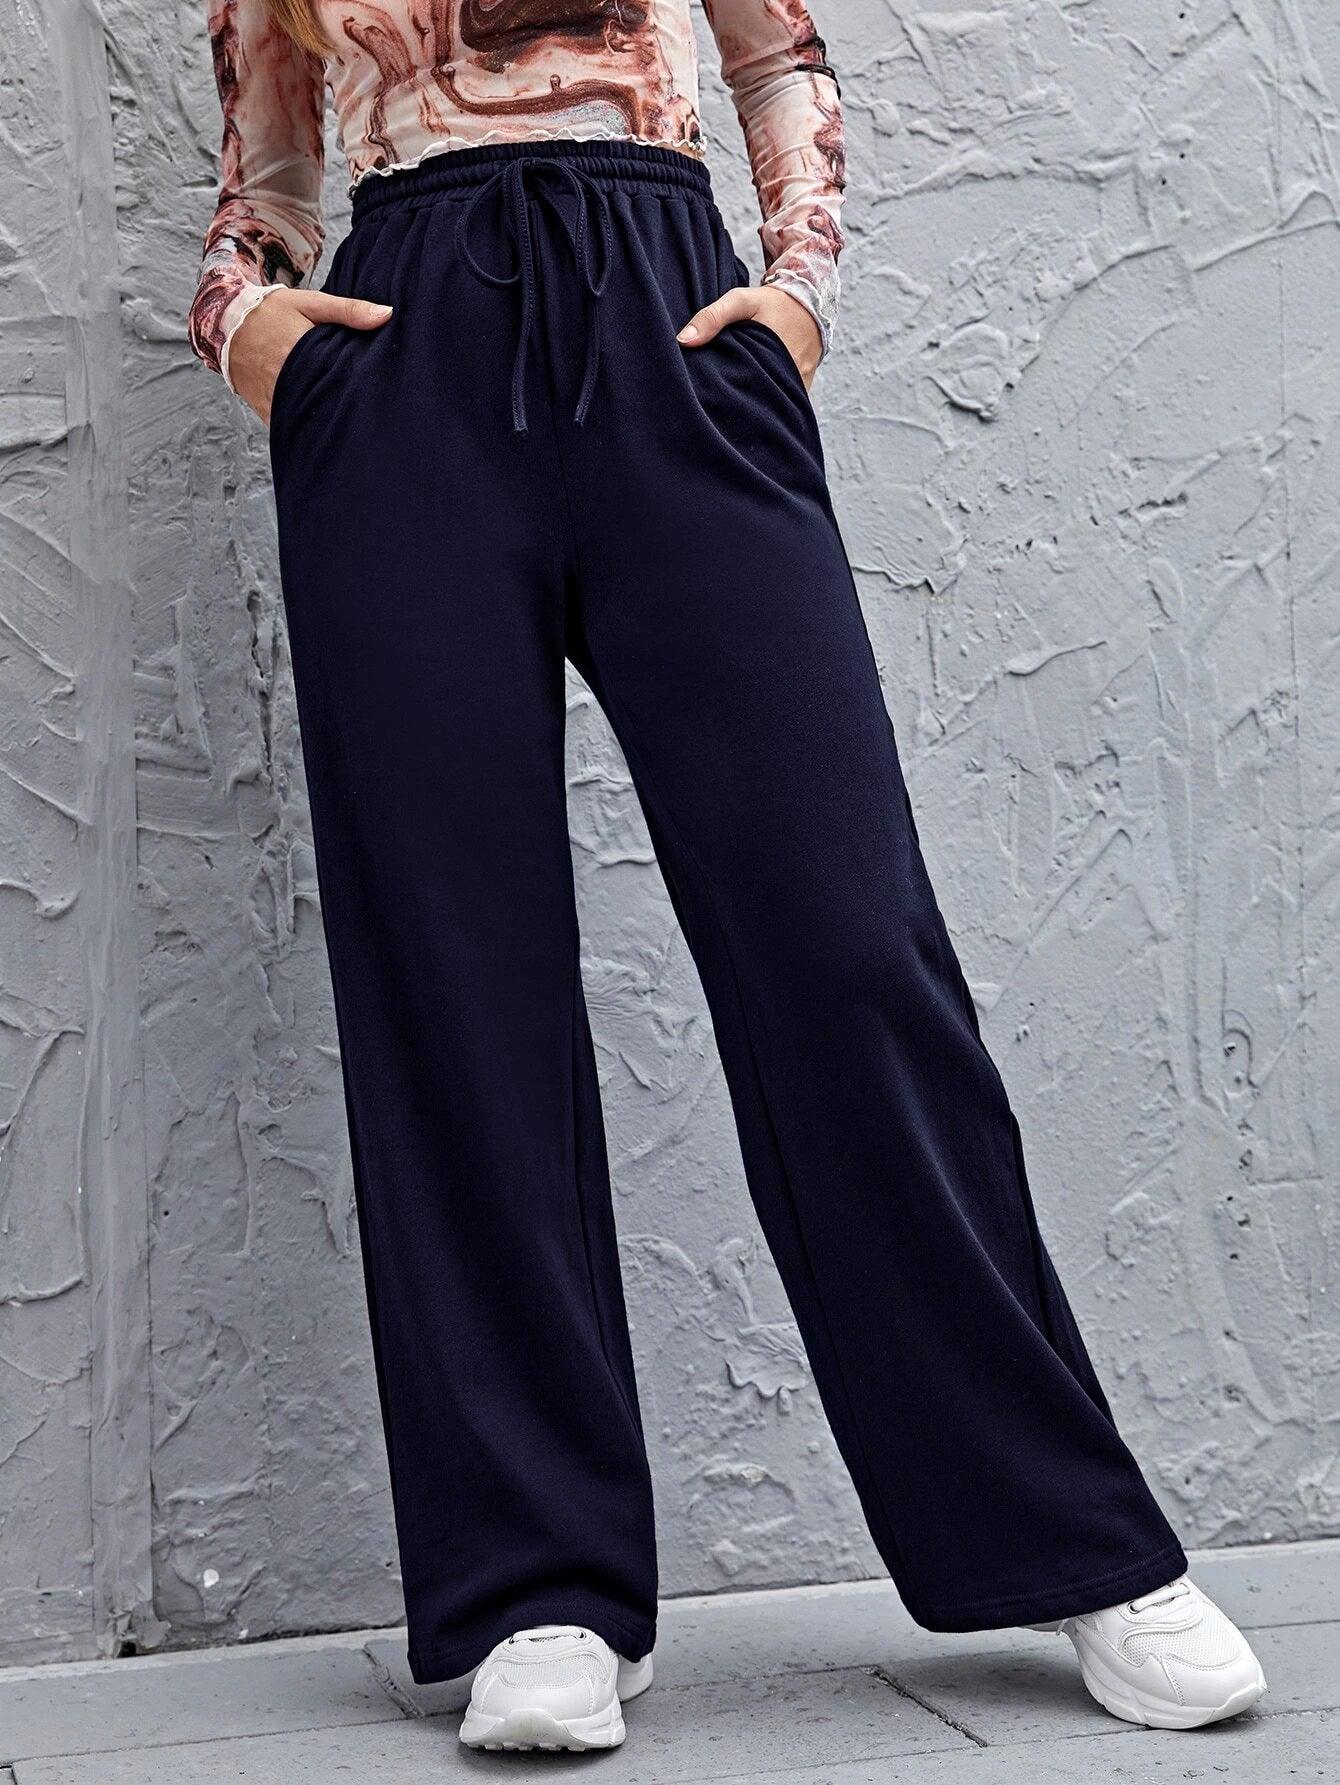 trouser polyester cotton loose home female plus size casual pants for women  4x-5x business casual pants for women yoga sweat pants women casual plus  size track pants wide leg cute sweatpants pants